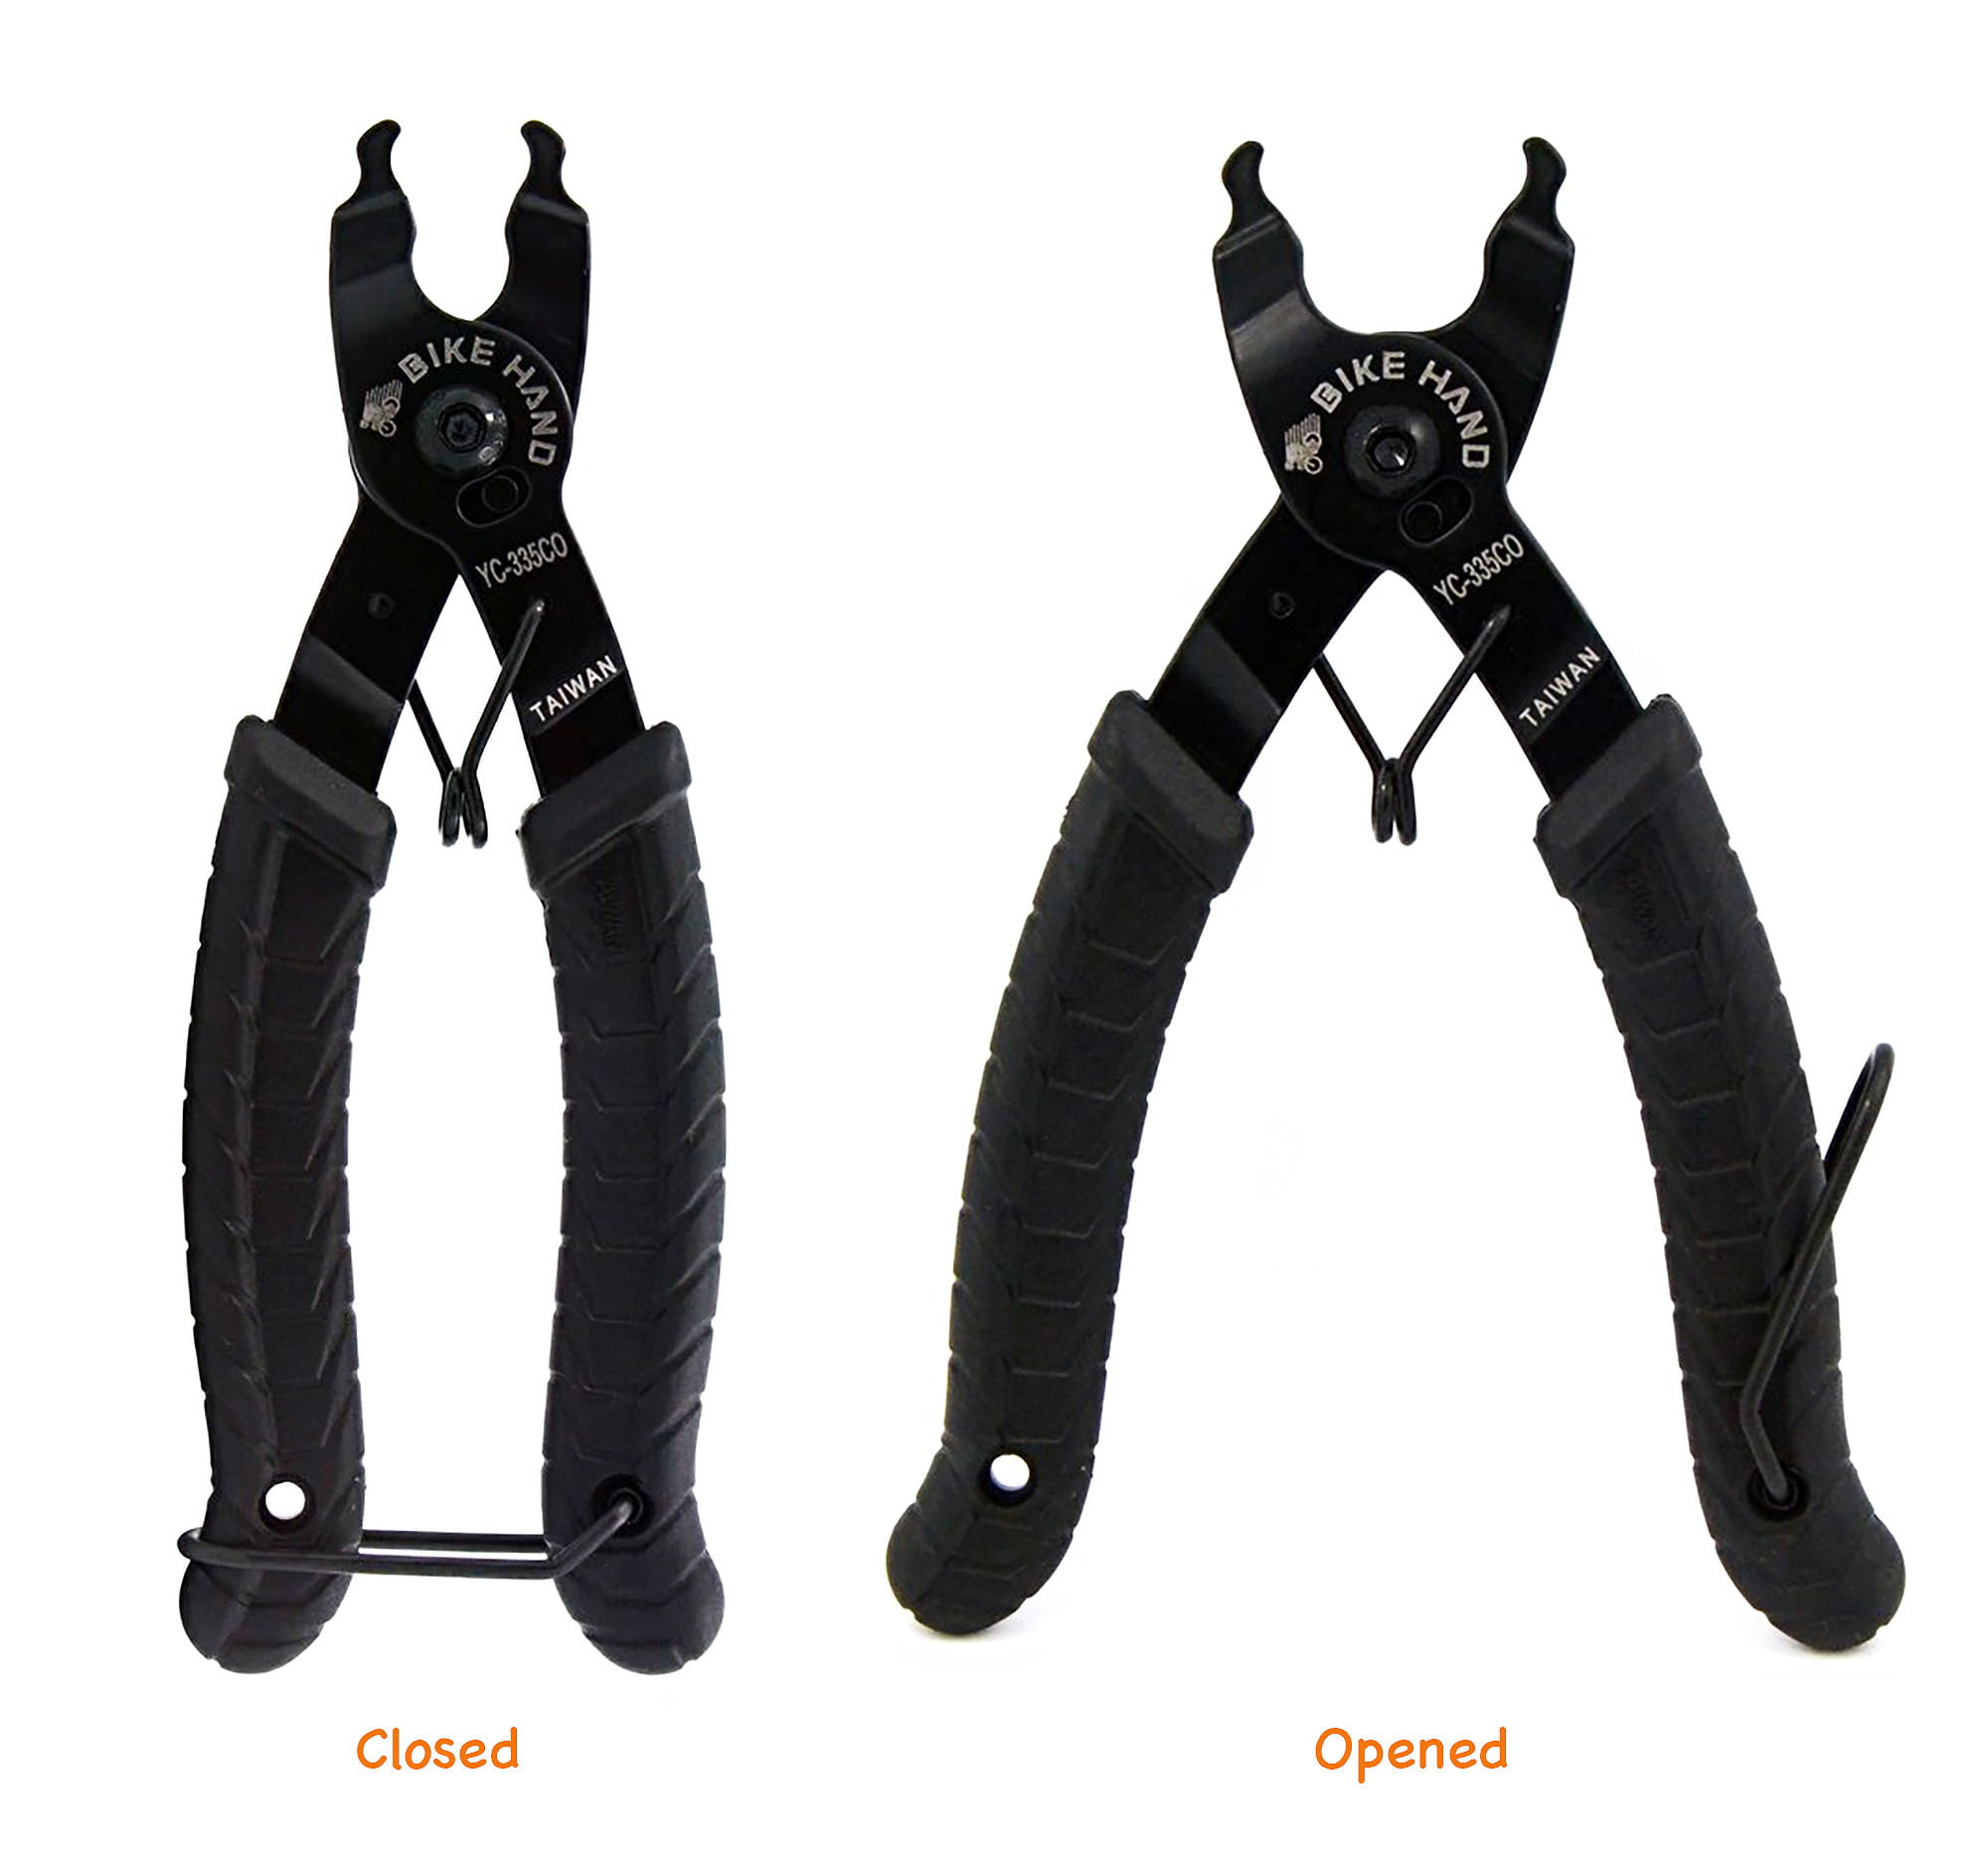 Details about   Bike Pliers Bicycle Repair Quick Link Pliers Quick Open Close Chain Tool BT 